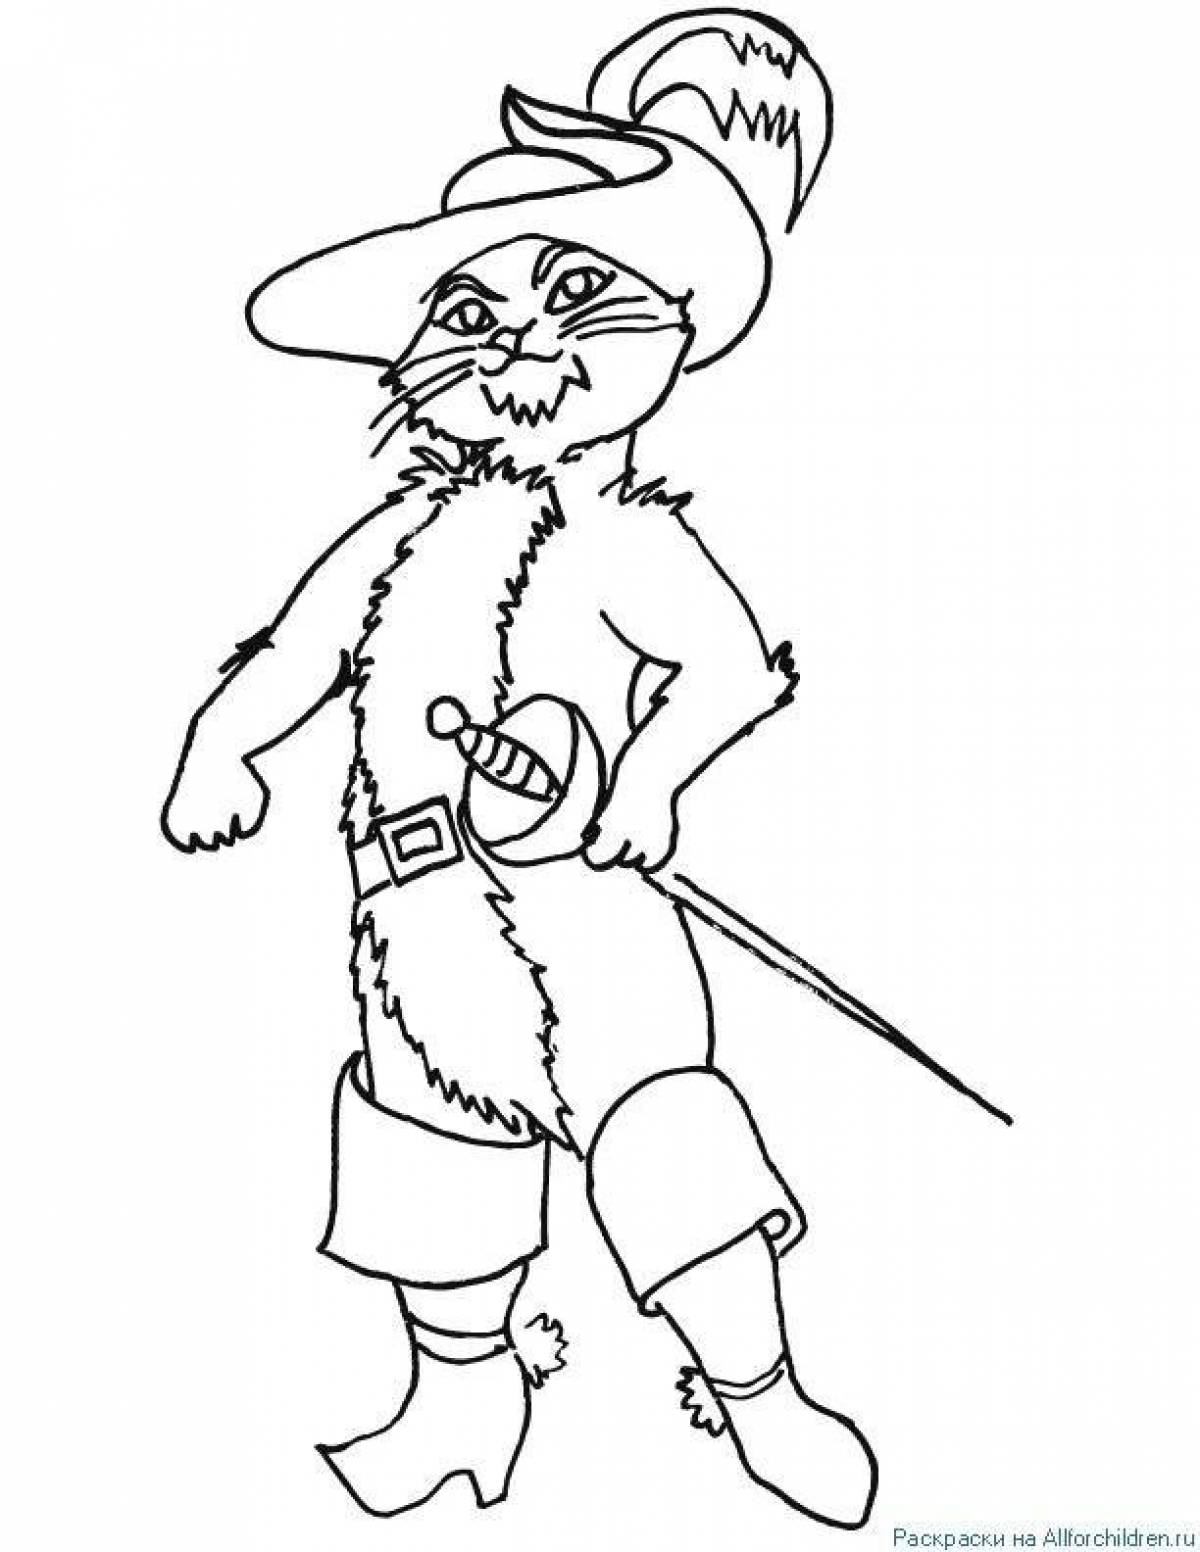 Coloring page playful puss in boots for kids